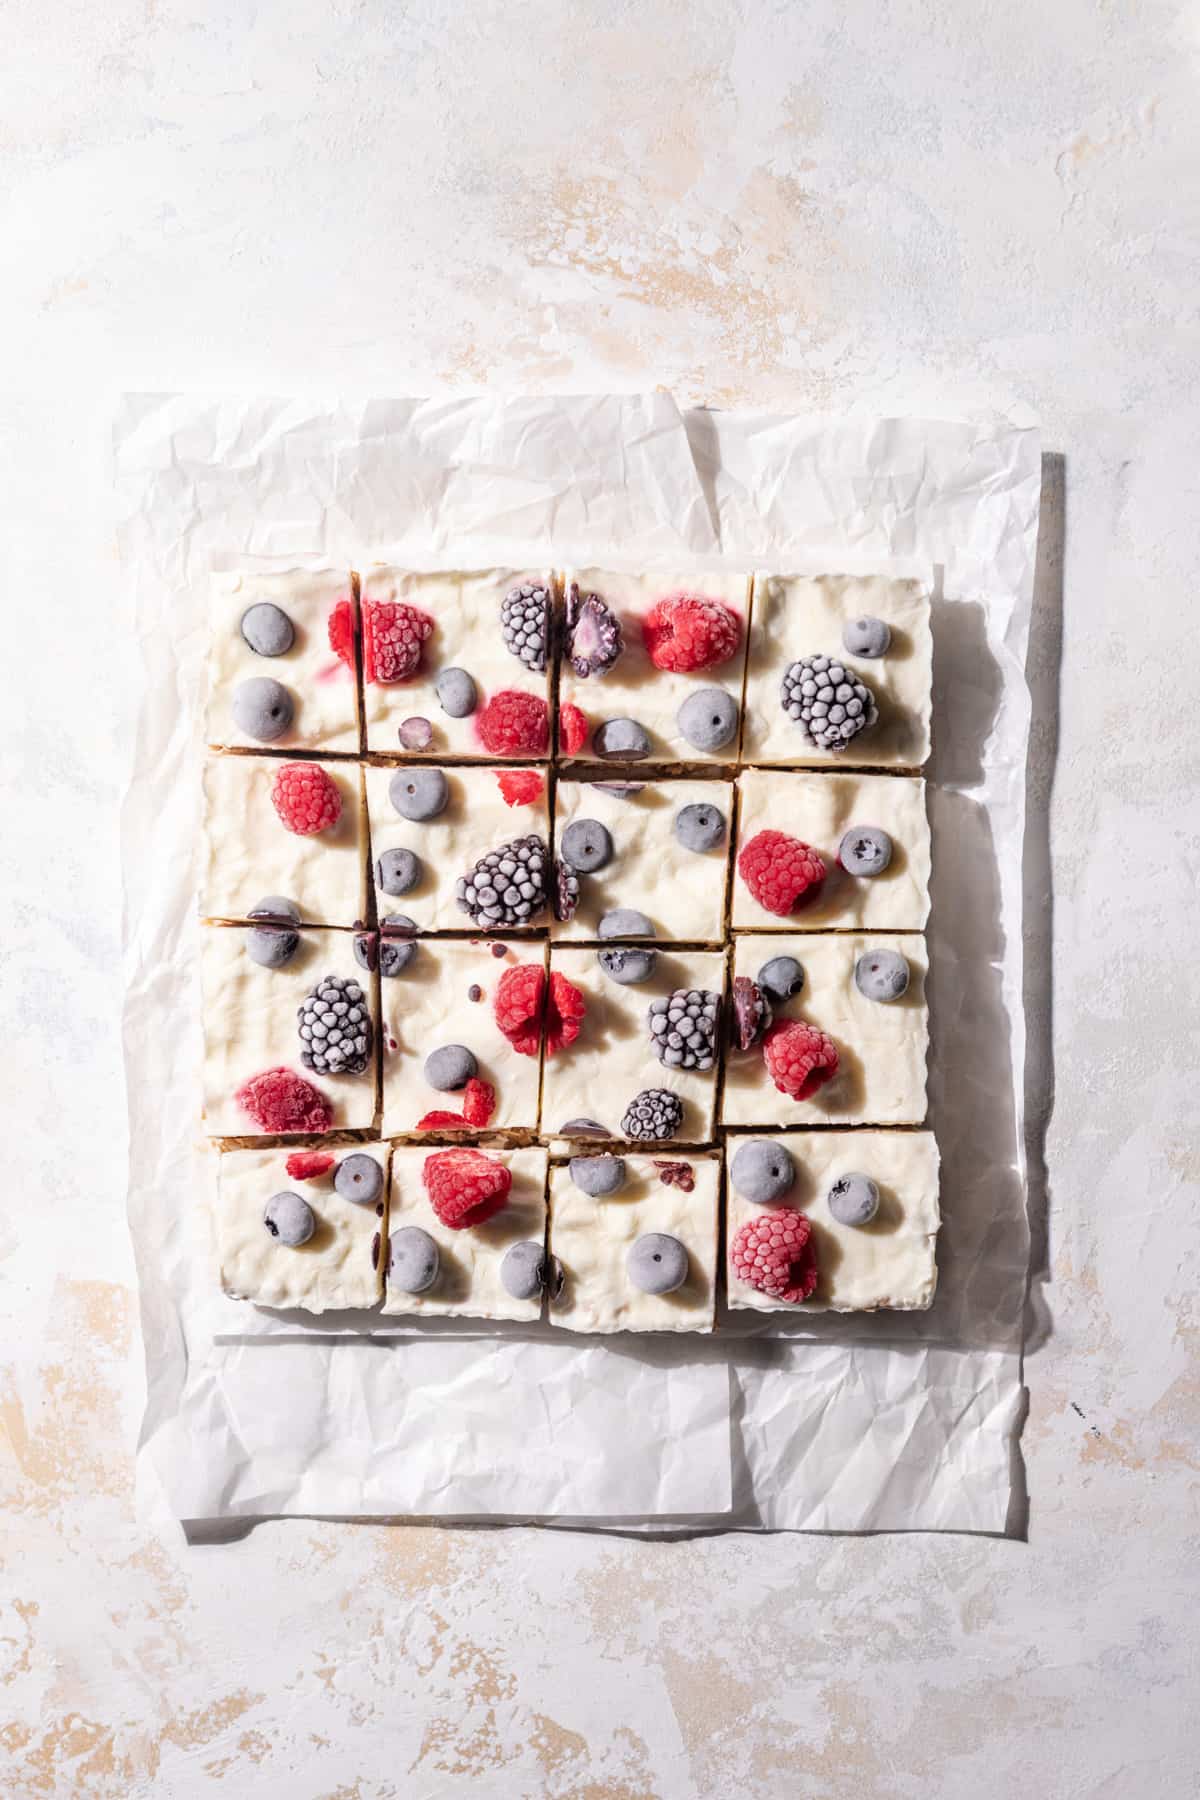 Frozen greek yogurt granola bars sliced on parchment paper topped with a variety of berries.